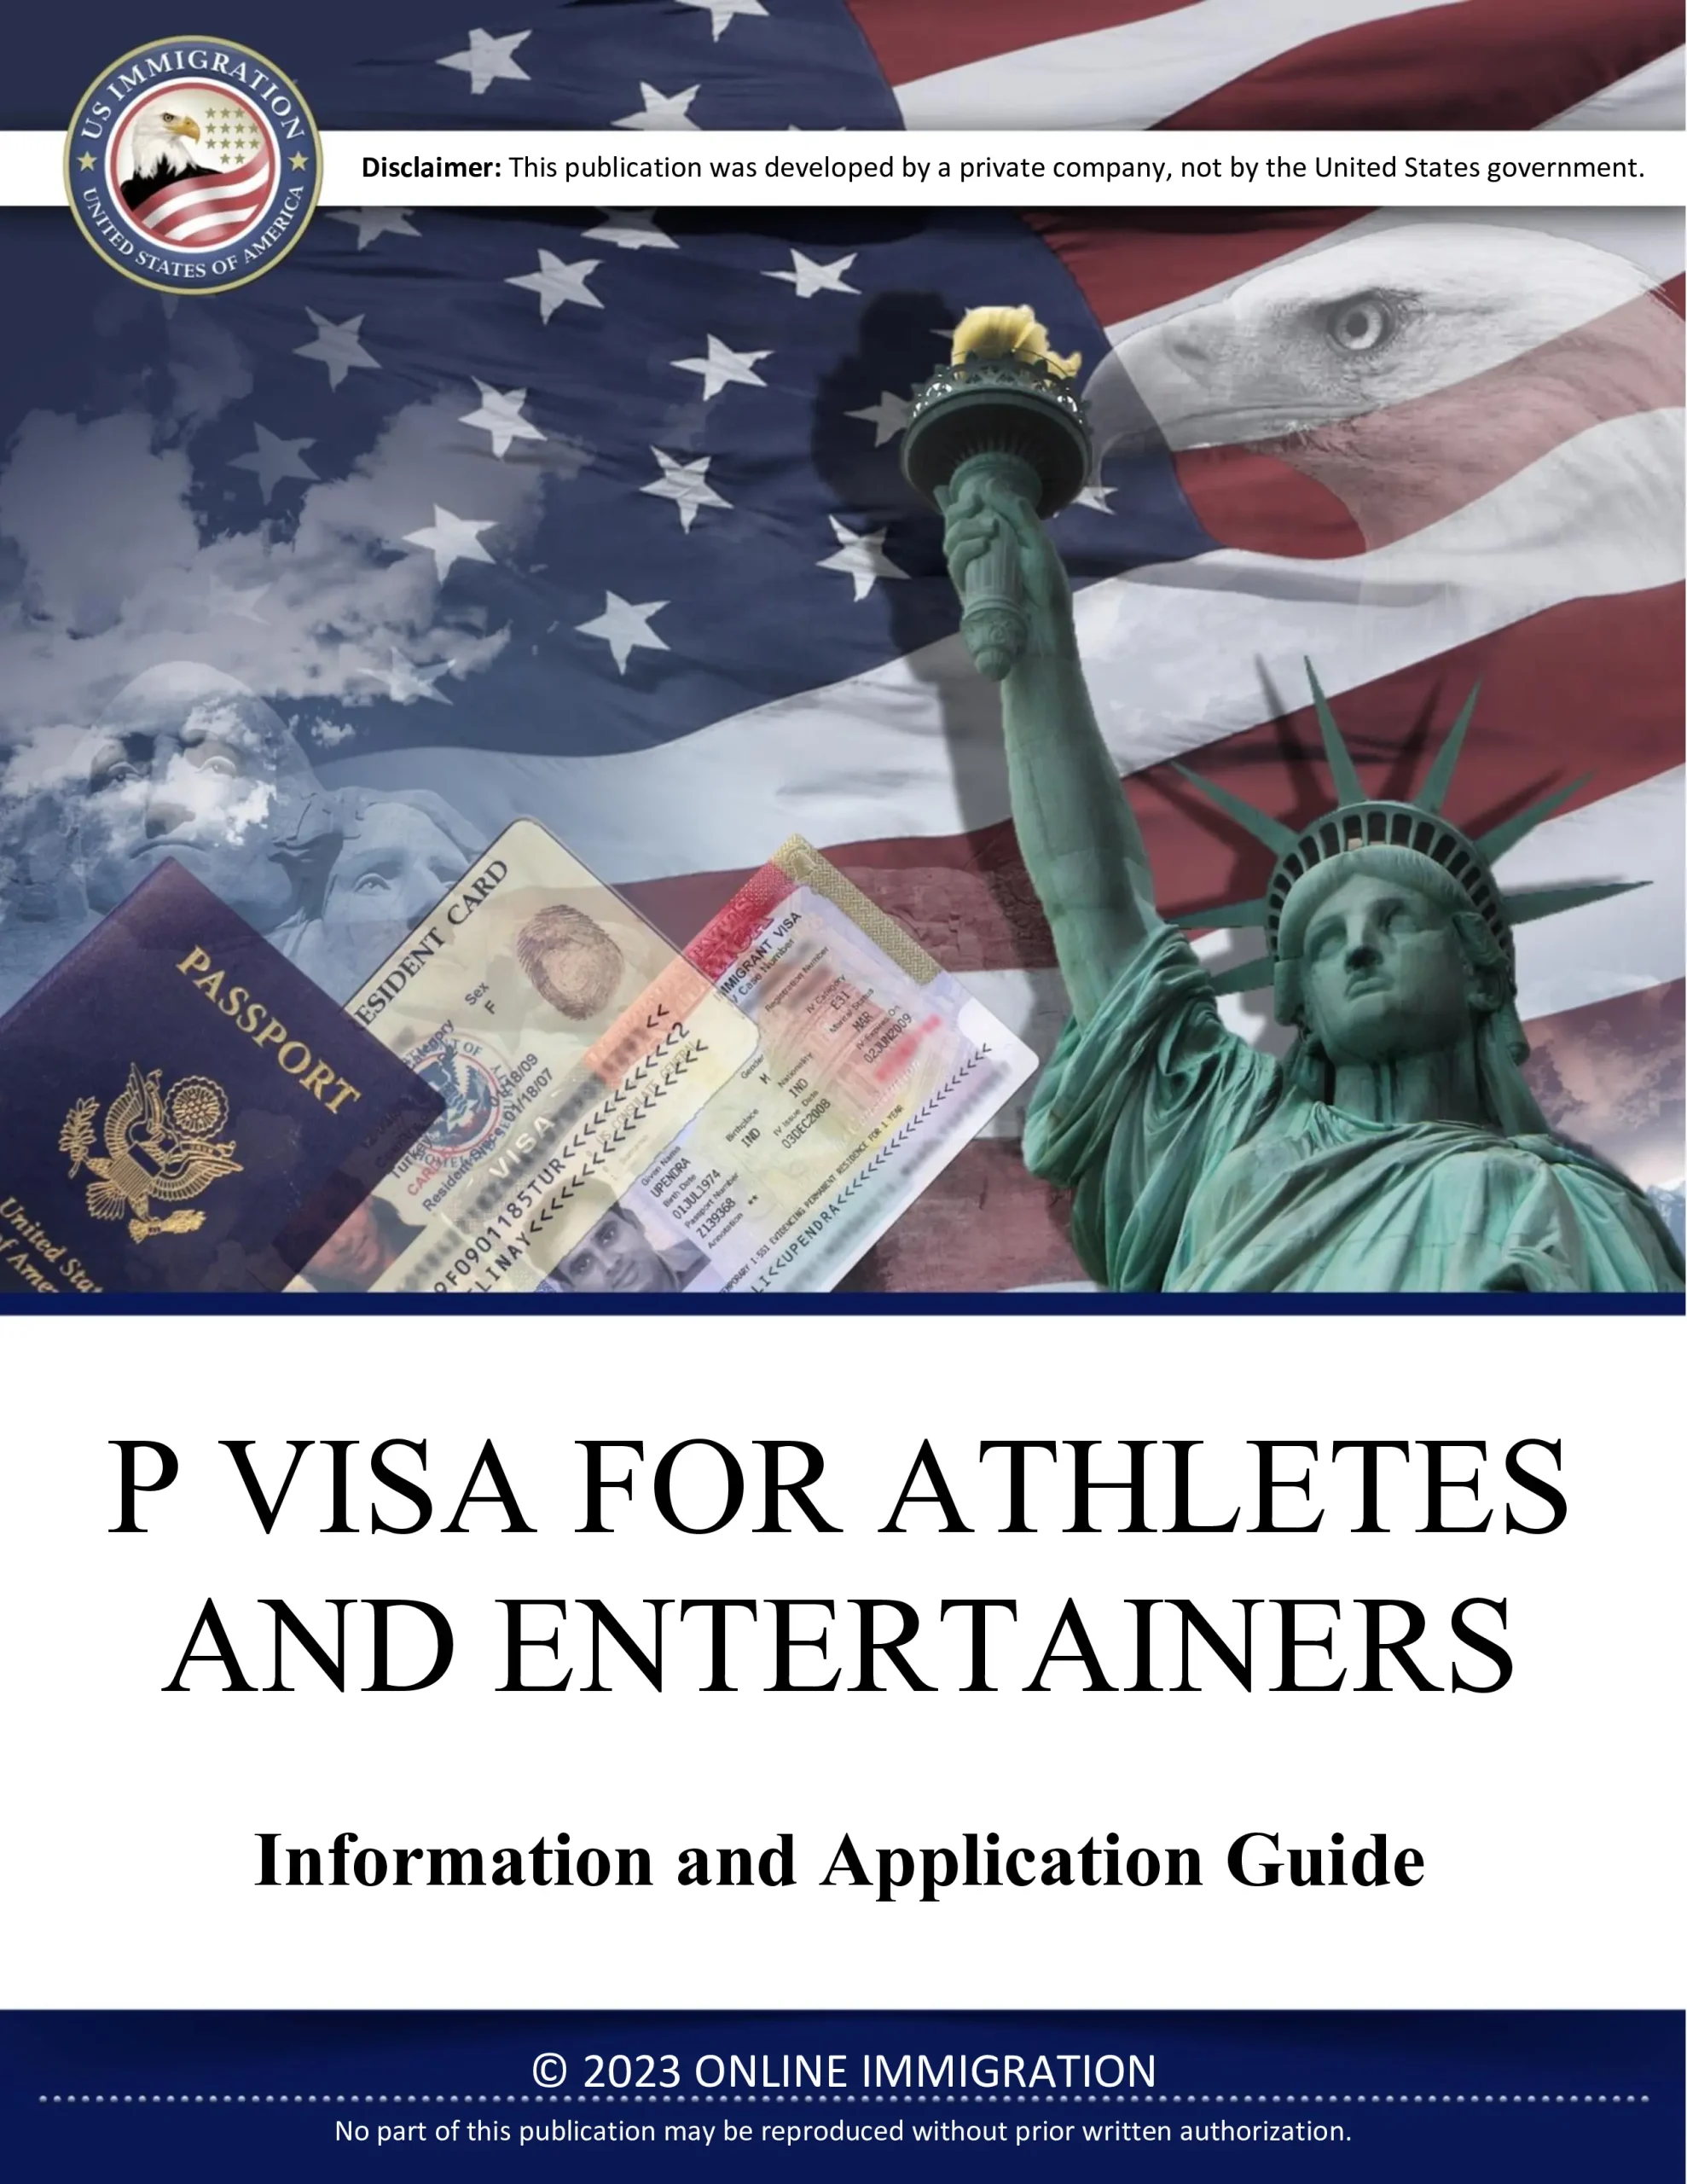 P Visa for Athletes and Entertainers